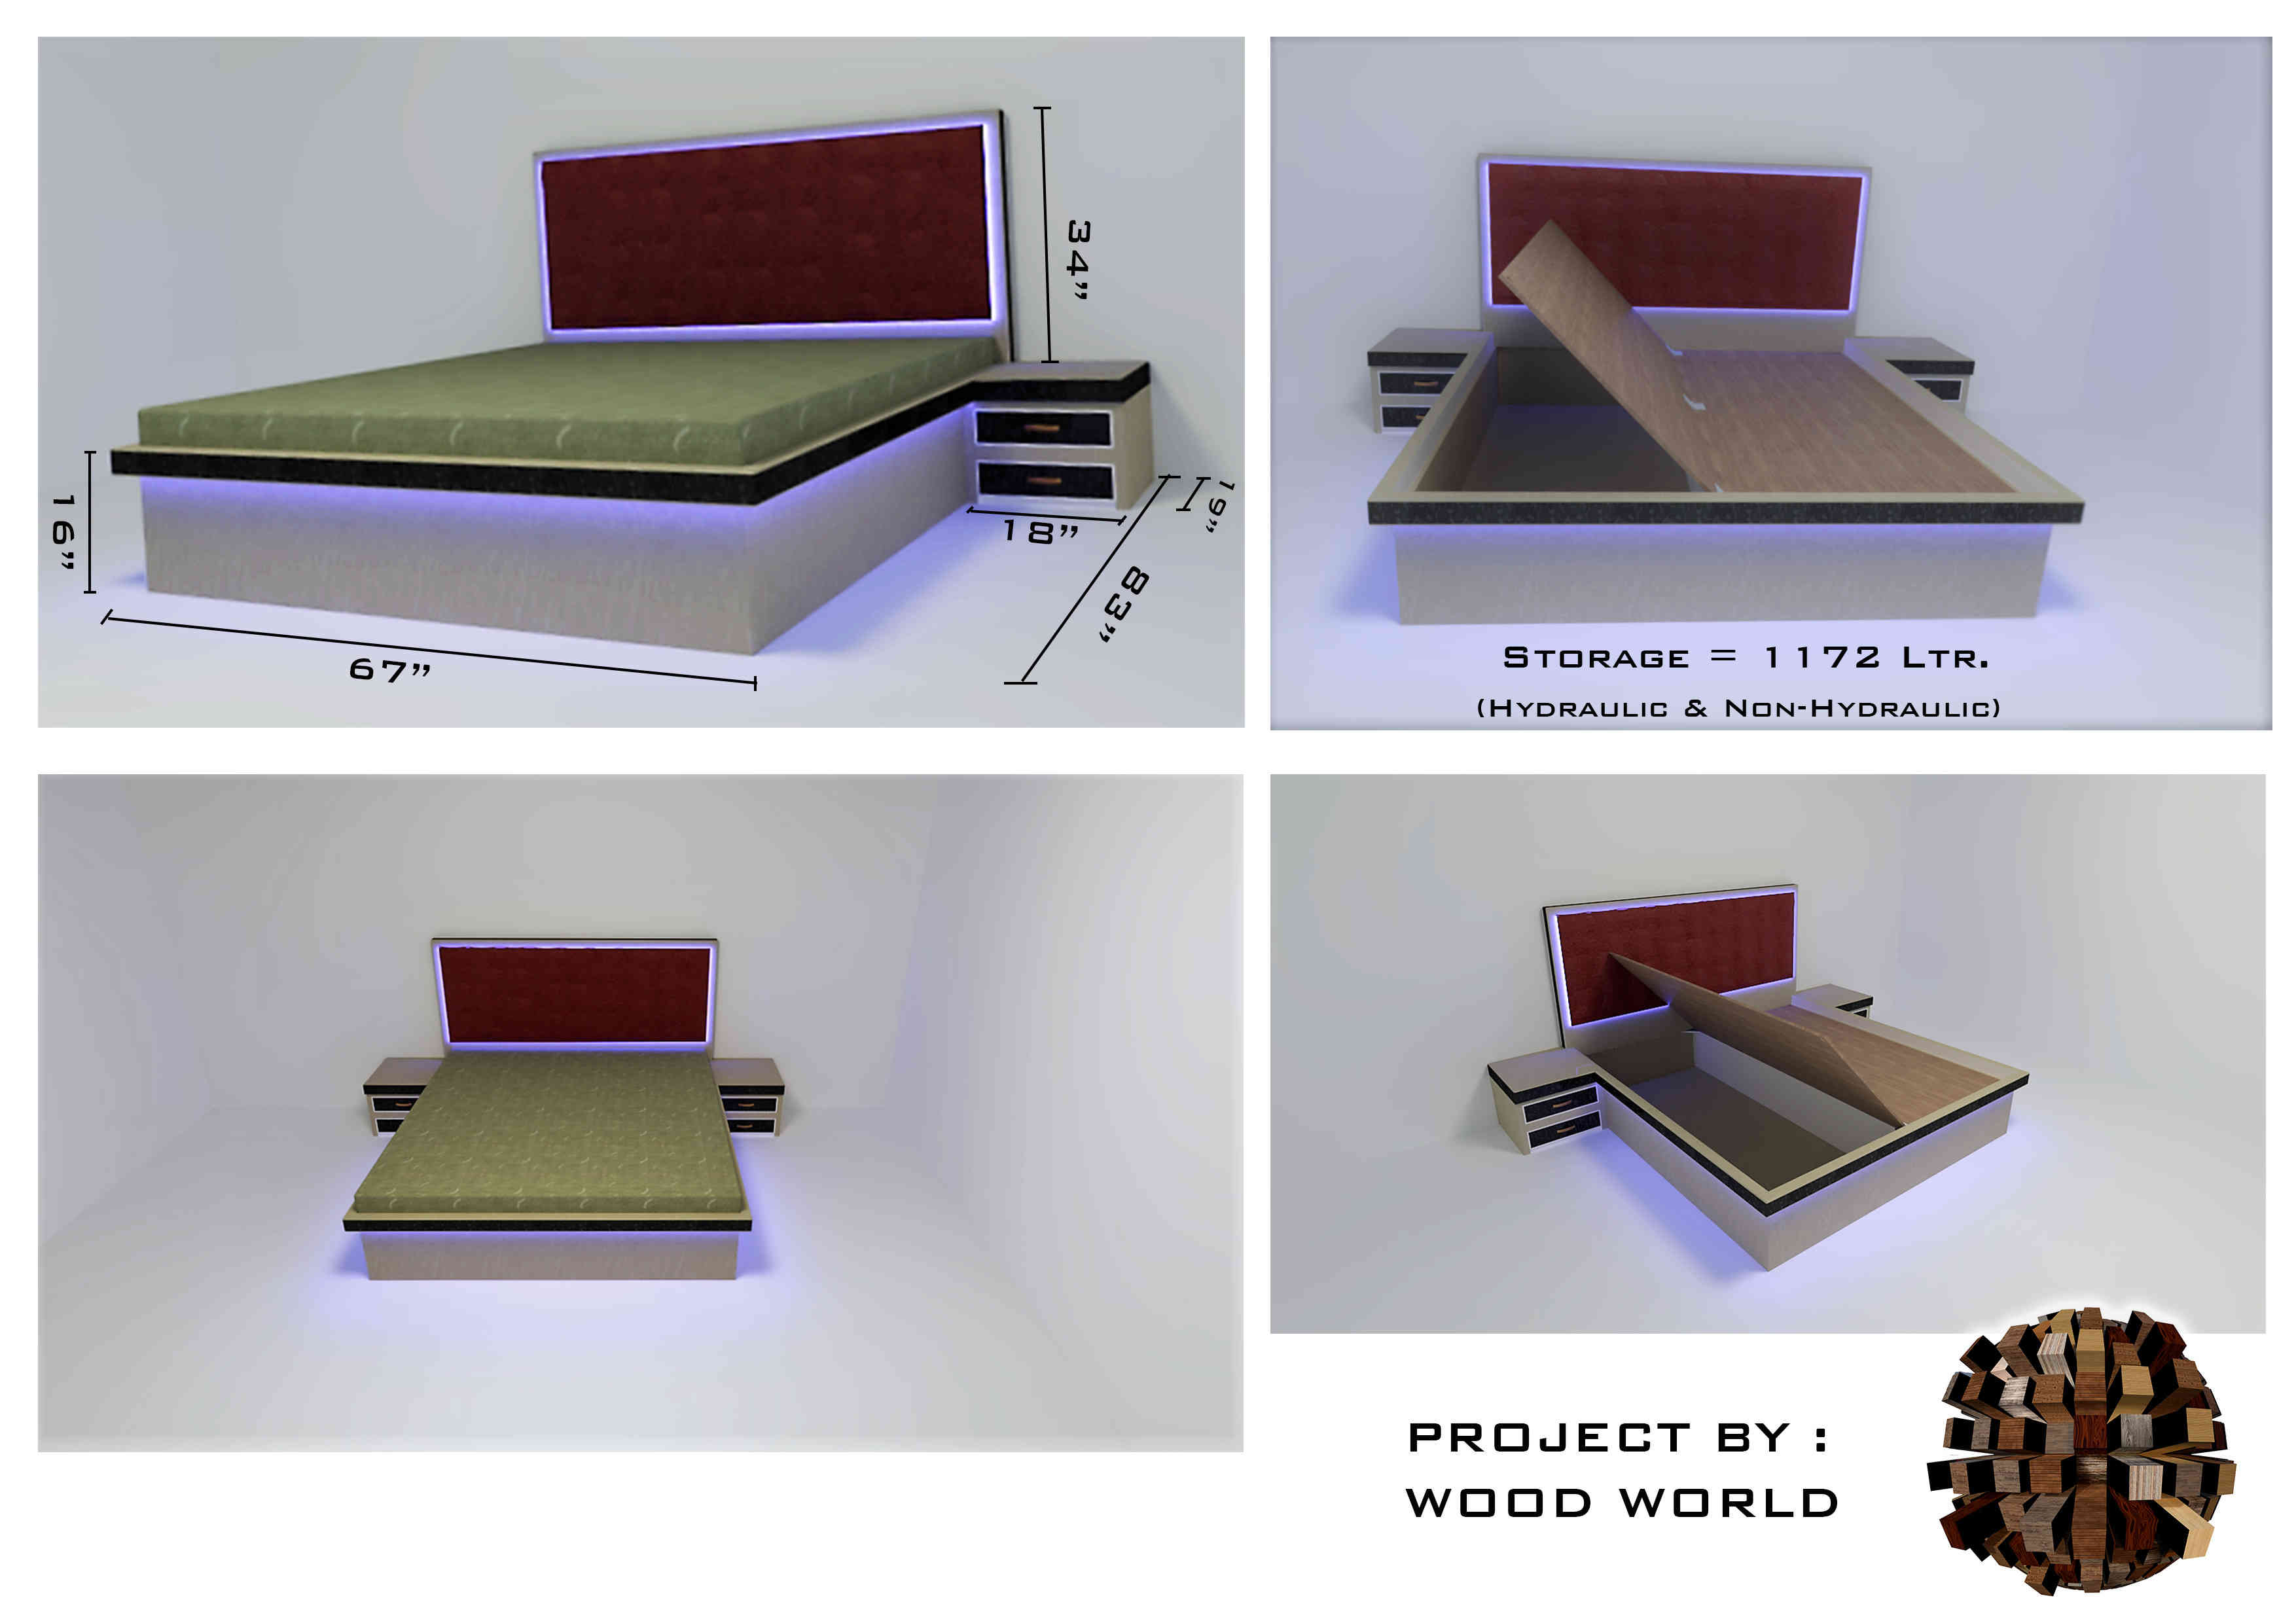 Contemporary Design of Bed. Ornamented by LEDs